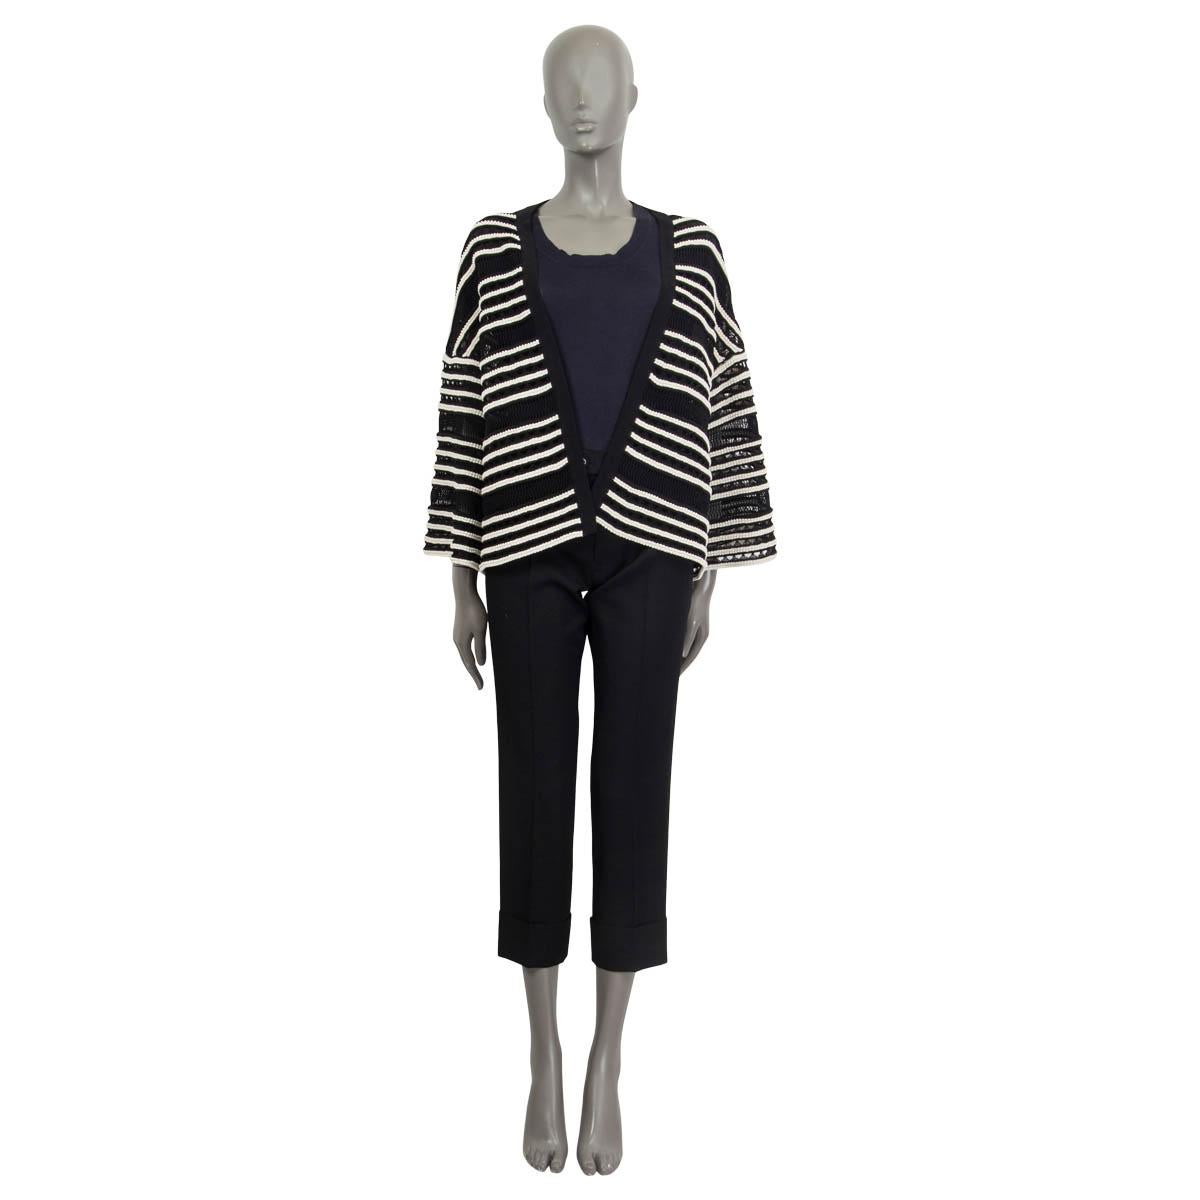 100% authentic Alaia striped crochet open cardigan in black and white cotton (79%) and polyamide (21%). Unlined. Has been worn and is in excellent condition.

Measurements
Tag Size	40
Size	M
Shoulder Width	61cm (23.8in)
Bust	108cm (42.1in) to 120cm